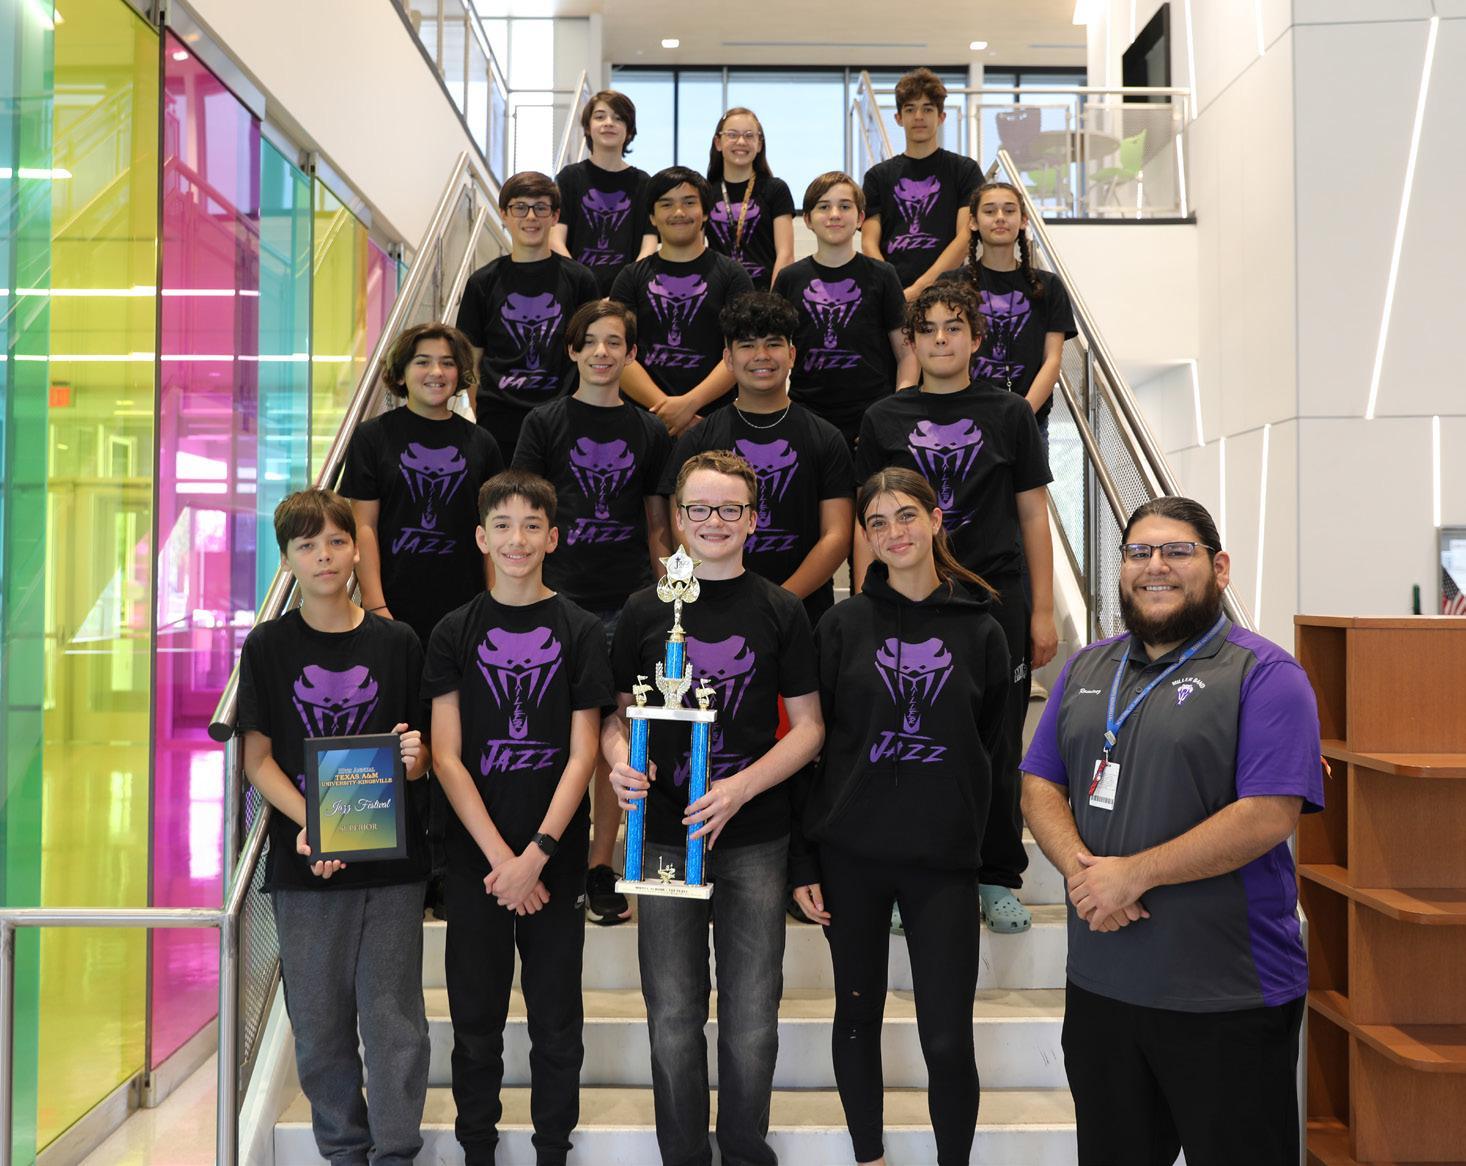 Middle school band takes top finish at state festival